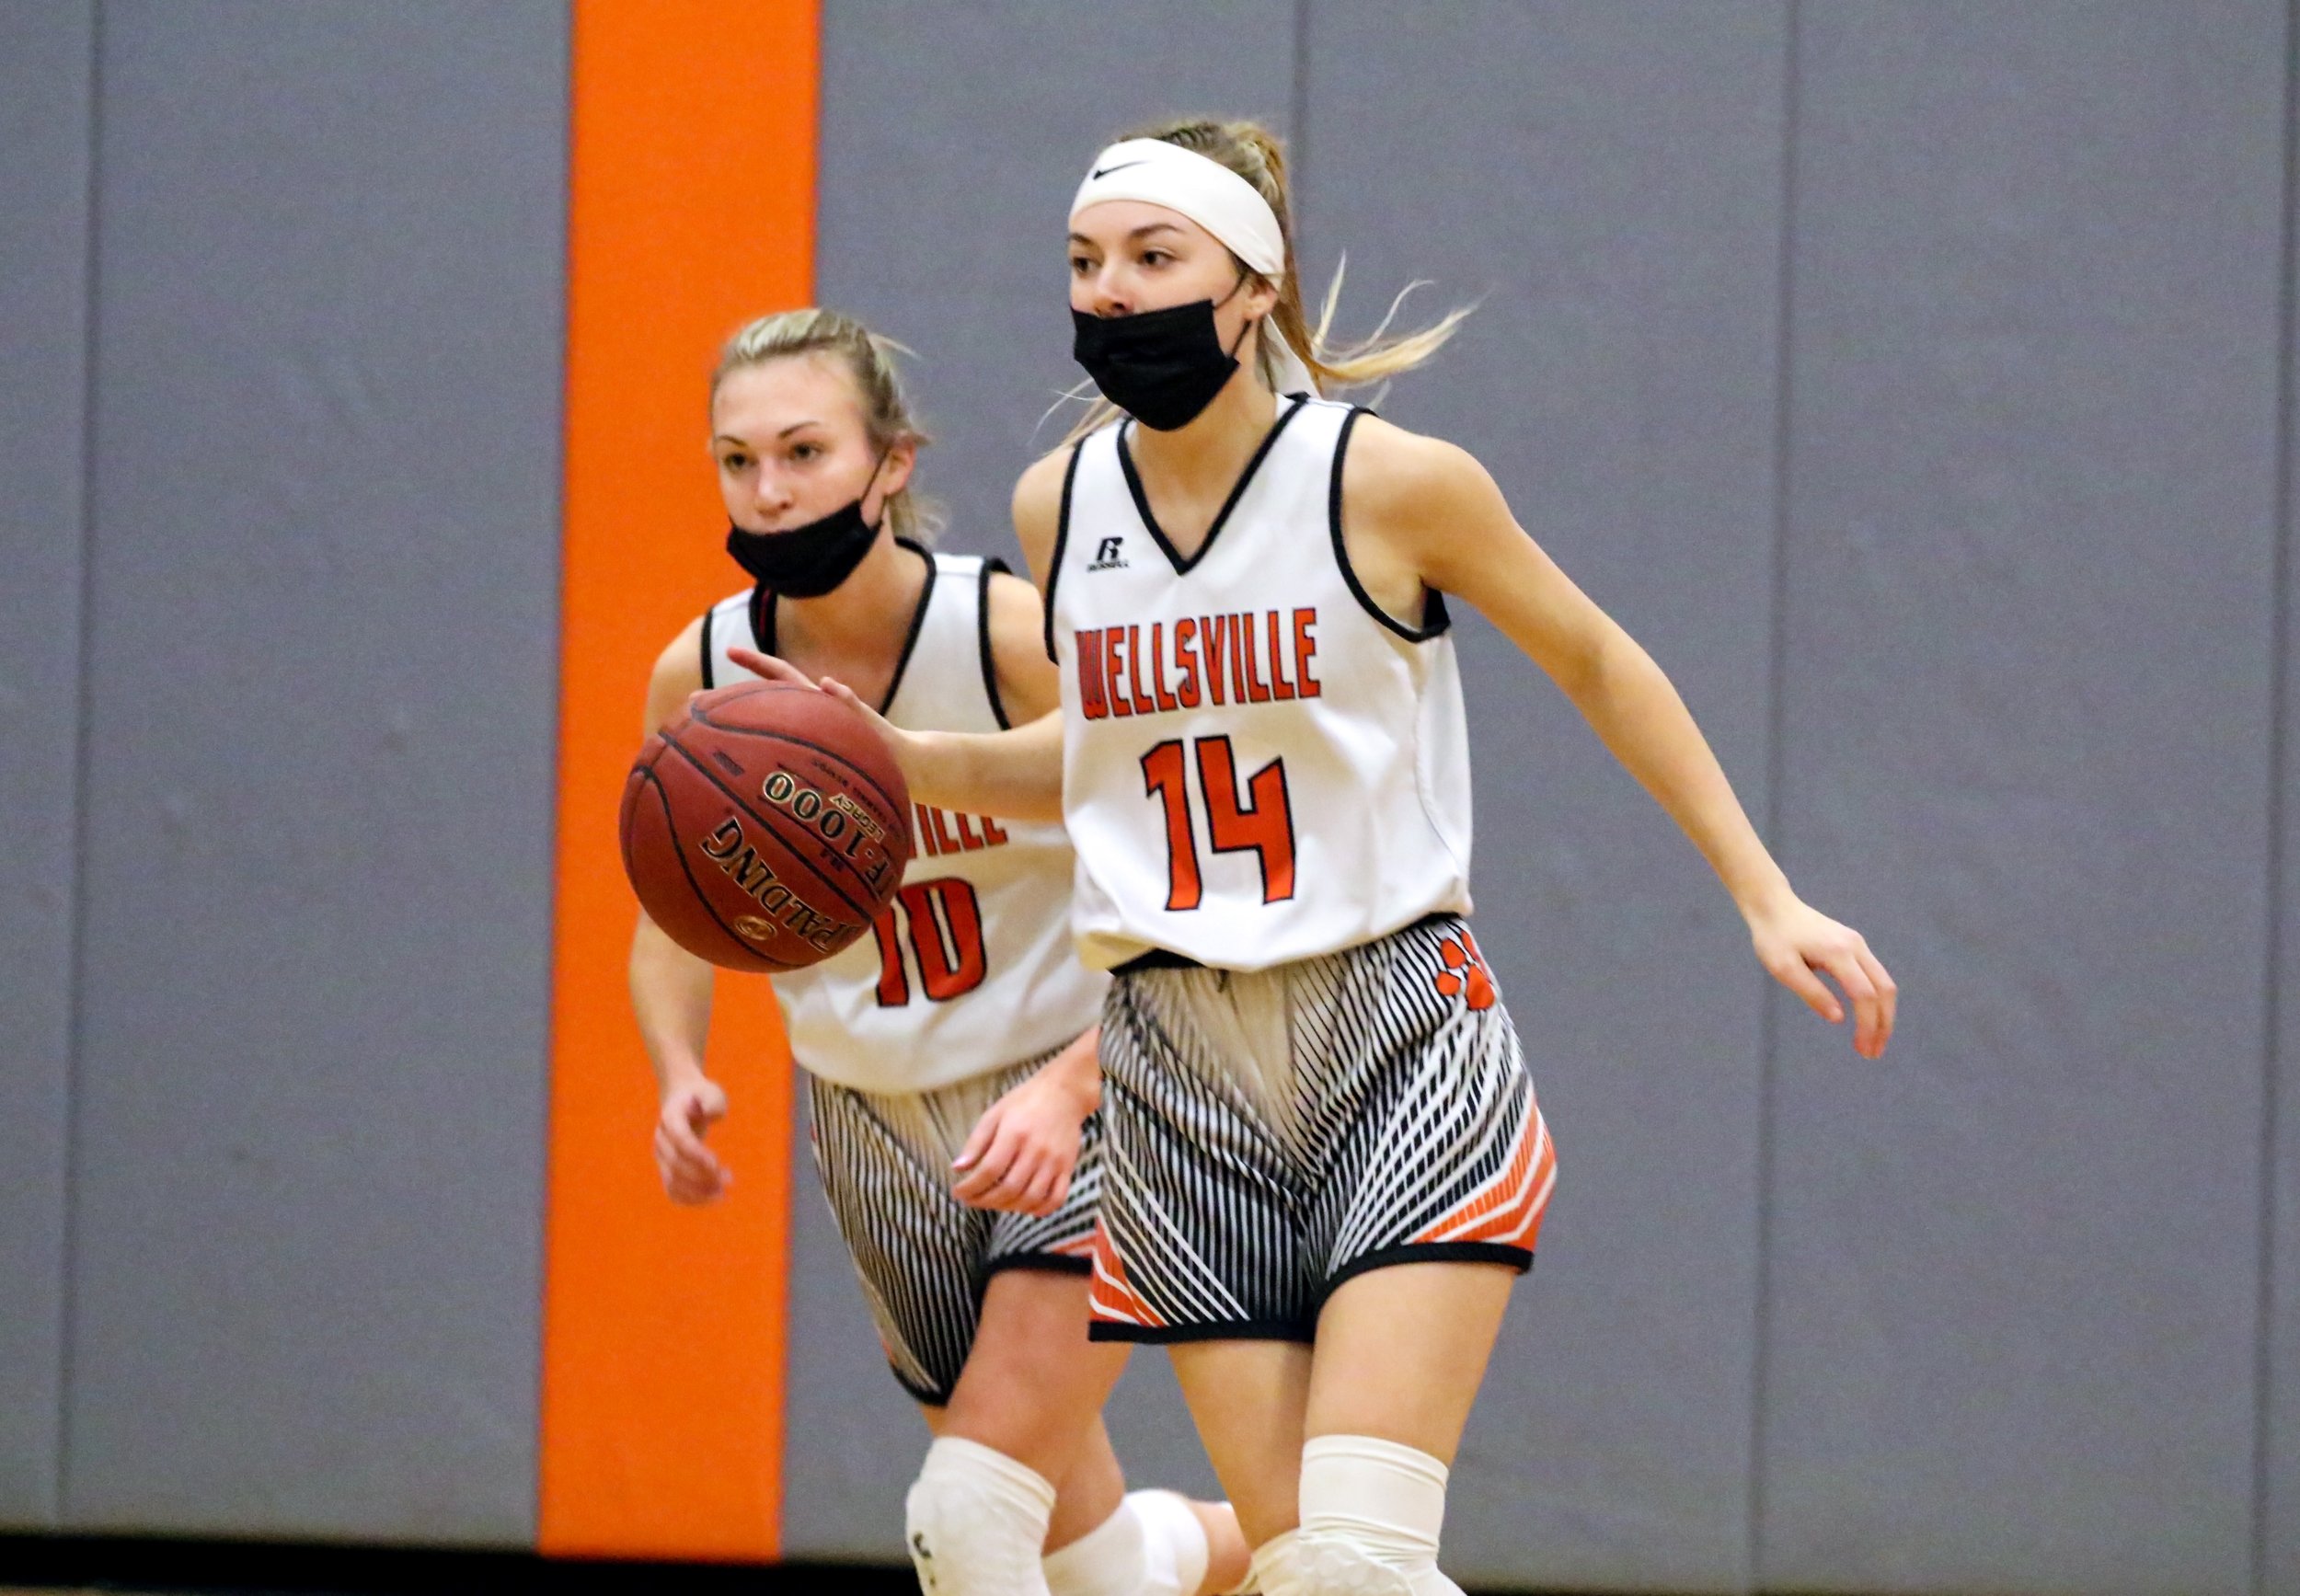  Wellsville freshman Natalie Adams (14) pushes the pace down court with senior Marley Adams (10) racing back during Saturday night’s home contest against Letchworth. [Chris Brooks/WellsvilleSports.com] 